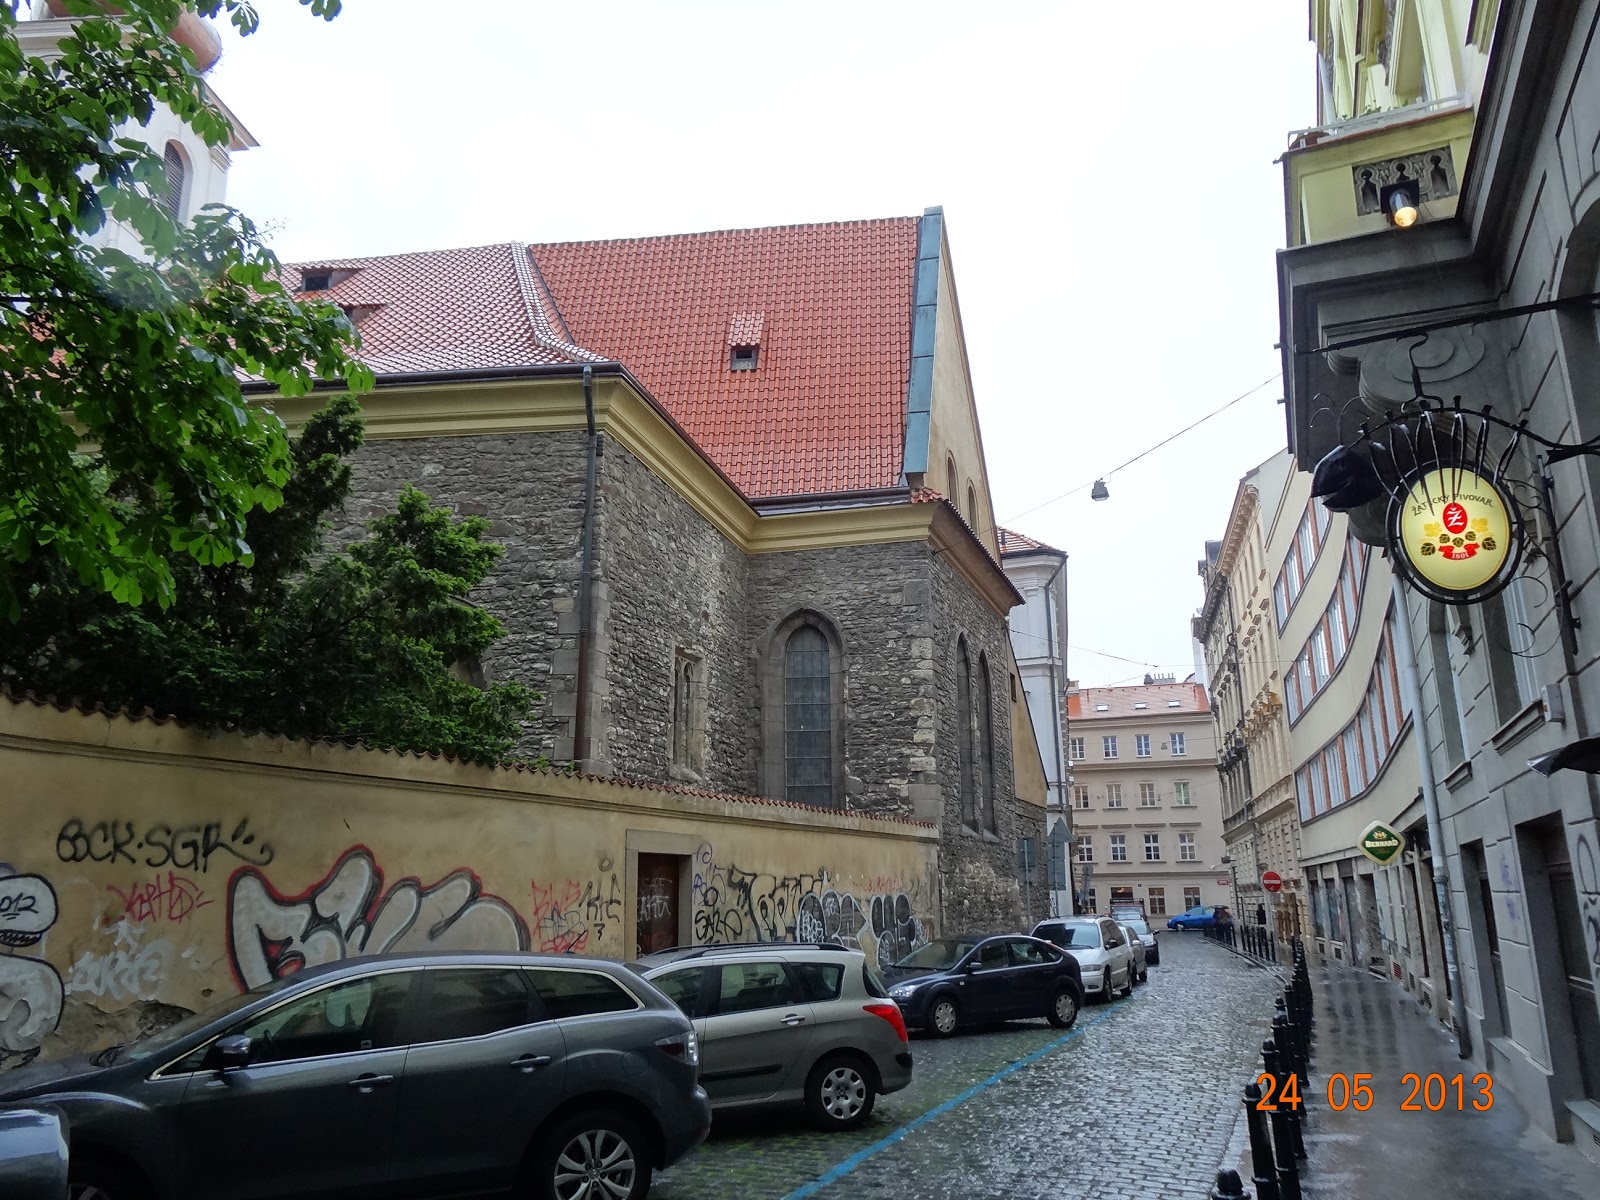 St. Michael Church is well hidden in the maze of winding streets pursuing the original street grid of village of Opatovice